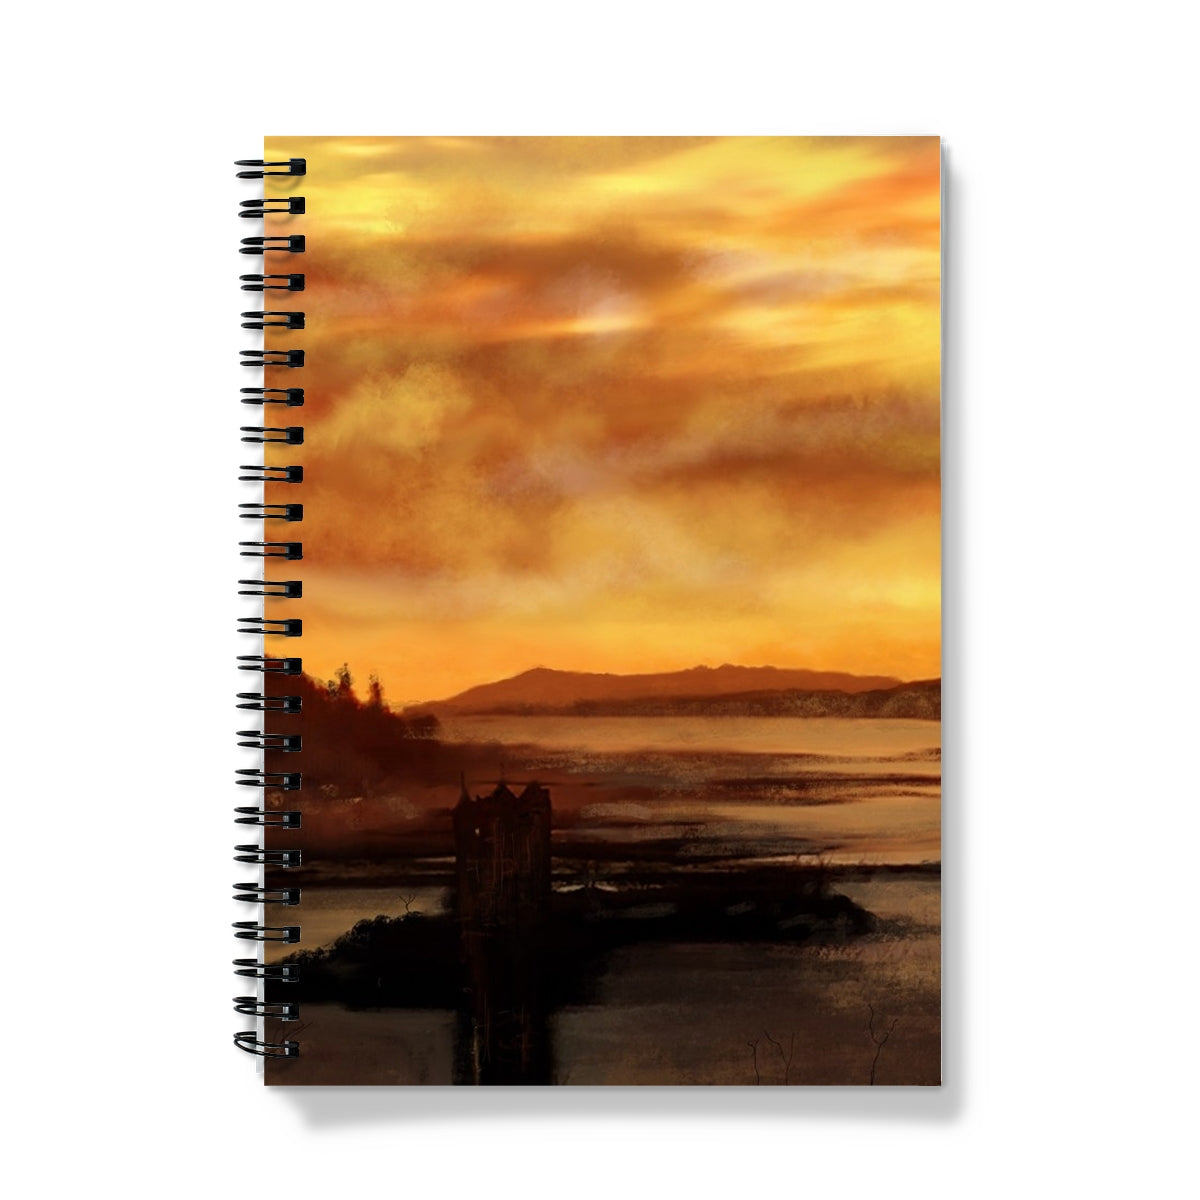 Castle Stalker Dusk Art Gifts Notebook-Journals & Notebooks-Historic & Iconic Scotland Art Gallery-A4-Graph-Paintings, Prints, Homeware, Art Gifts From Scotland By Scottish Artist Kevin Hunter